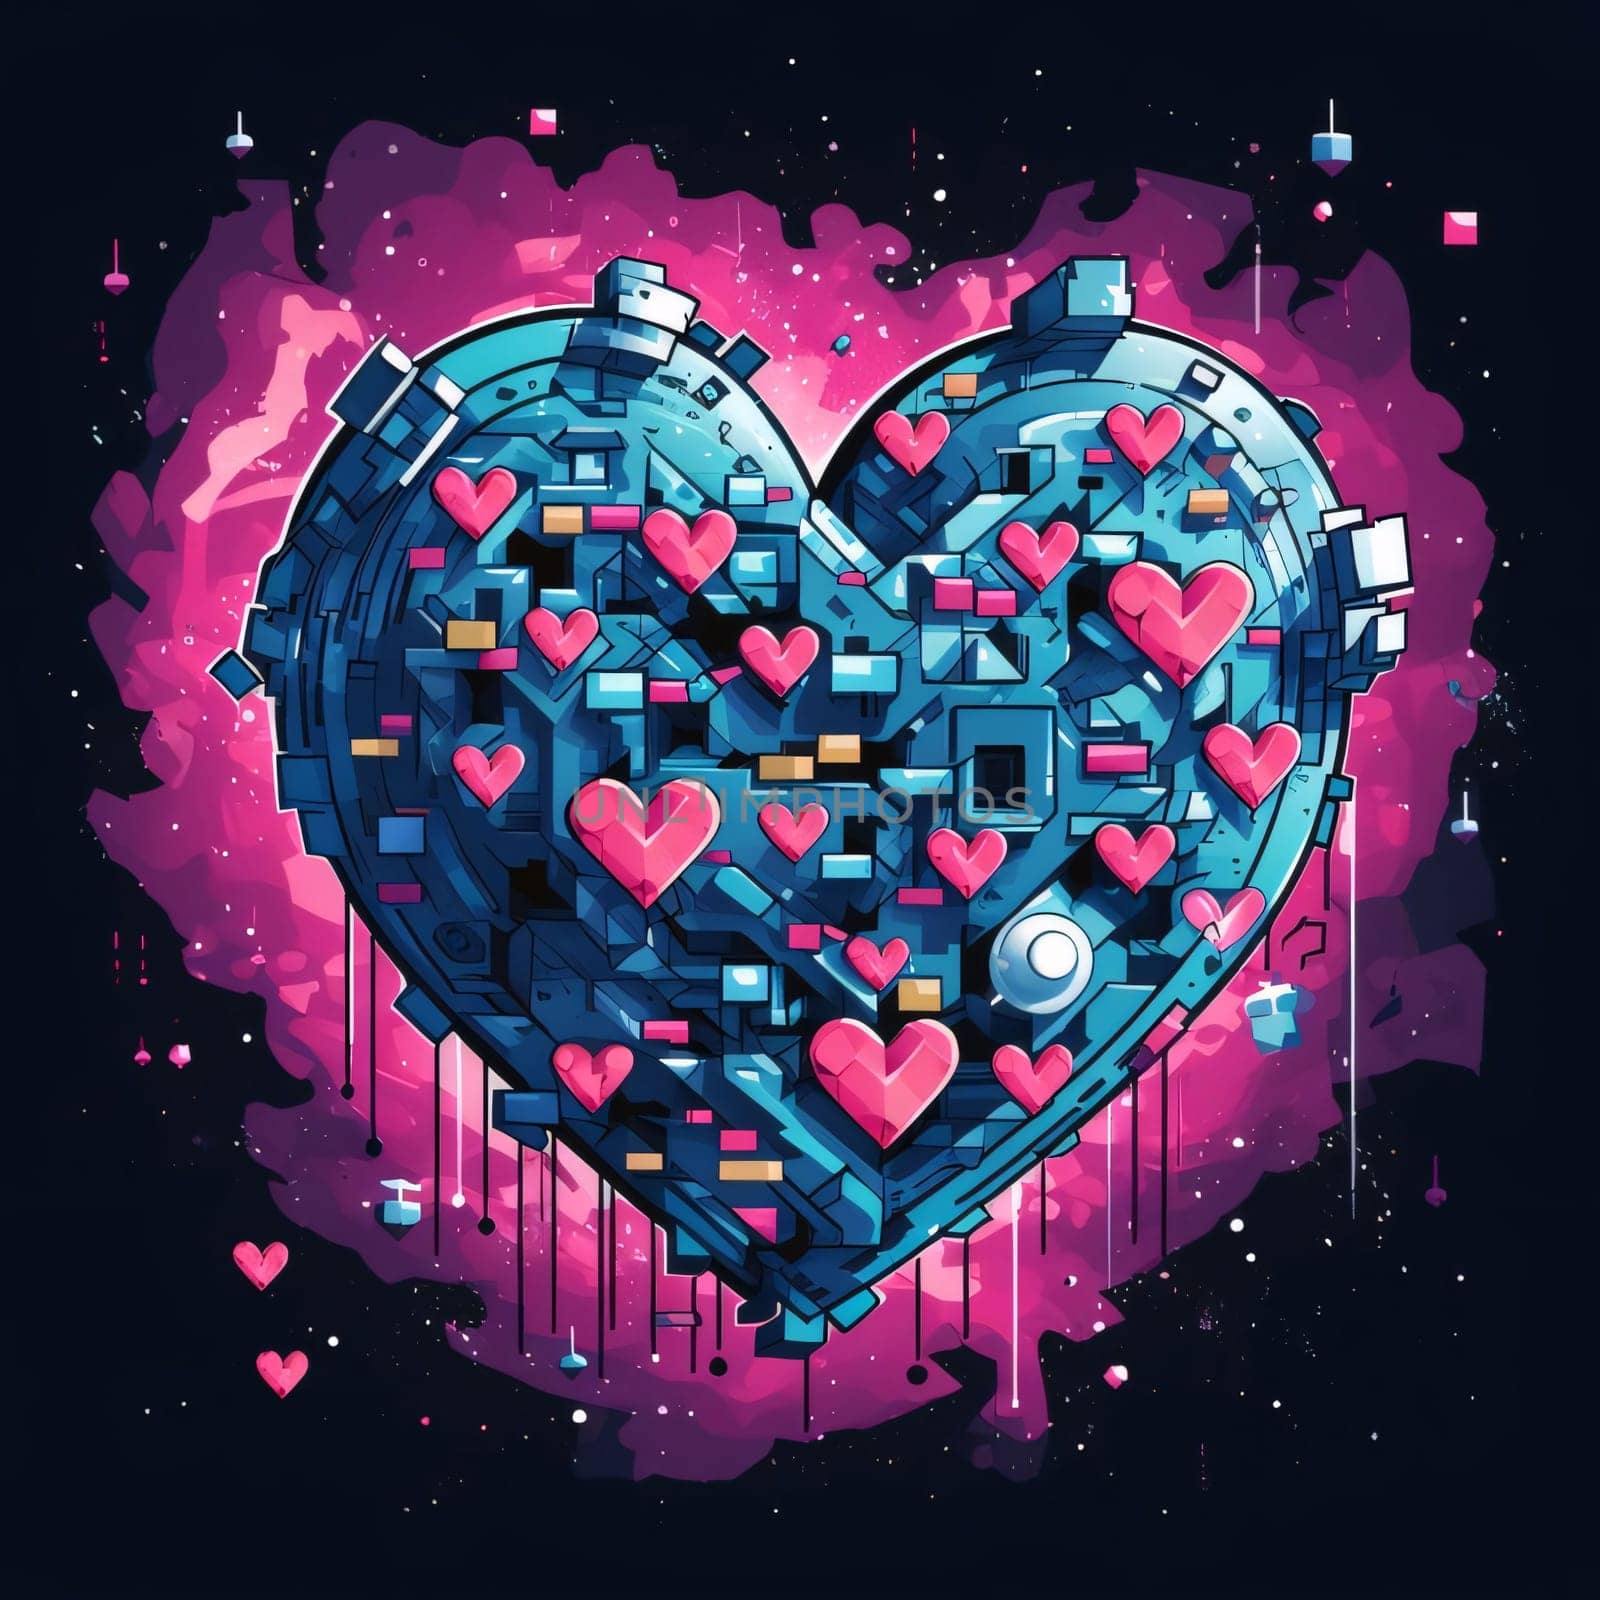 Abstract background design: Vector illustration of a heart with abstract elements on the dark background.